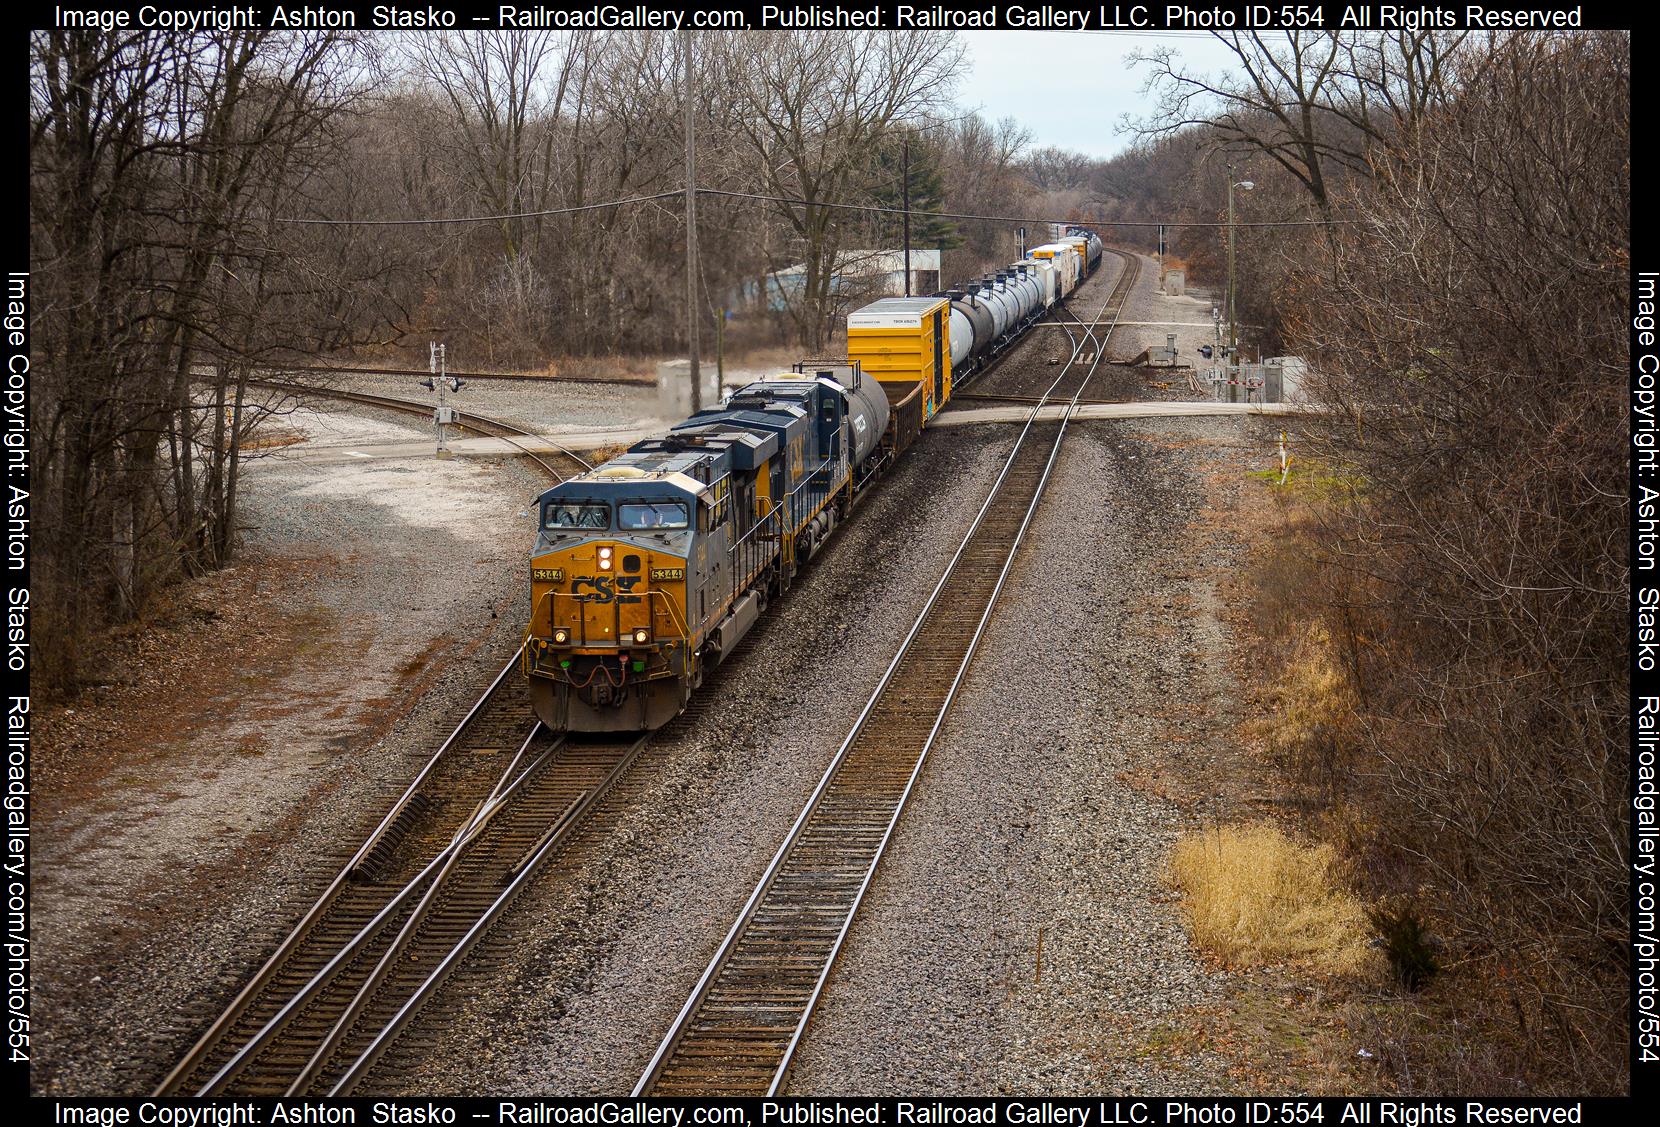 5344 is a class ES44DC and  is pictured in Portage, Indiana, United States .  This was taken along the Garrett Subdivision  on the CSX Transportation. Photo Copyright: Ashton  Stasko  uploaded to Railroad Gallery on 01/10/2023. This photograph of 5344 was taken on Saturday, January 07, 2023. All Rights Reserved. 